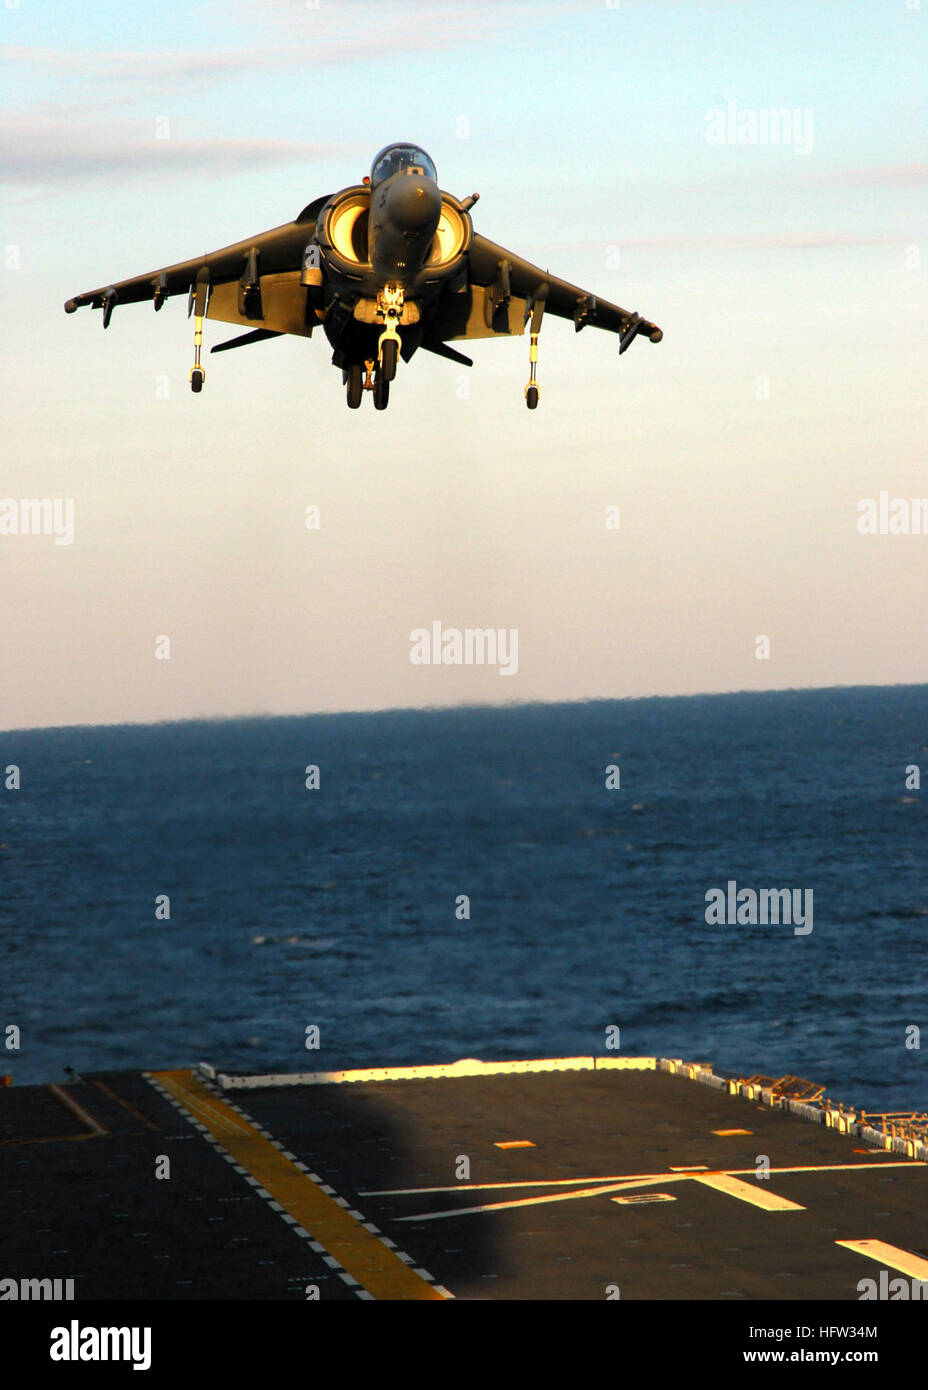 071117-N-3165S-044 ATLANTIC OCEAN (Nov. 17, 2007)  An AV-8B Harrier lands on the flight deck of the amphibious assault ship USS Nassau (LHA 4) as pilots with the air combat element of the 24th Marine Expeditionary Unit conduct deck landing qualifications. Nassau is preparing for its upcoming deployment. U.S. Navy photo by Mass Communication Specialist Seaman Ryan Steinhour (RELEASED) US Navy 071117-N-3165S-044 An AV-8B Harrier lands on the flight deck of the amphibious assault ship USS Nassau (LHA 4) Stock Photo